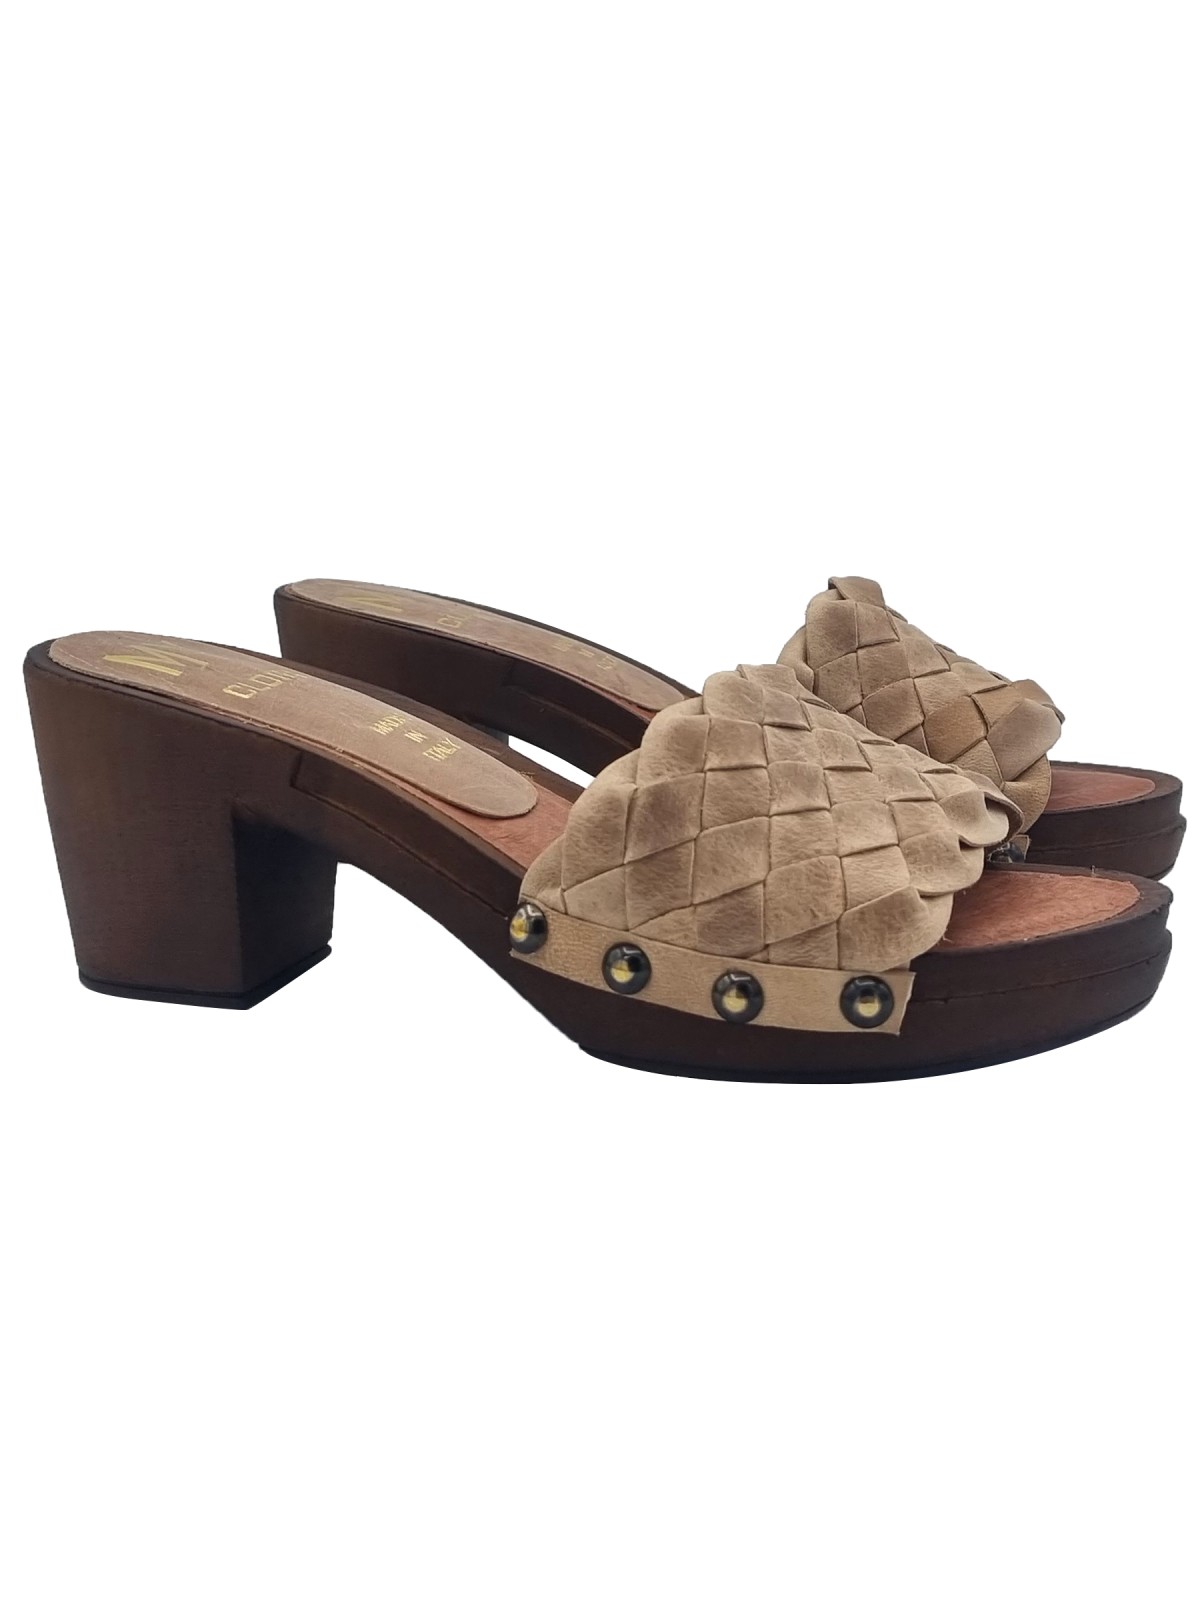 BRAIDED CLOGS IN TAUPE COLOR LEATHER WITH 7 CM HEEL